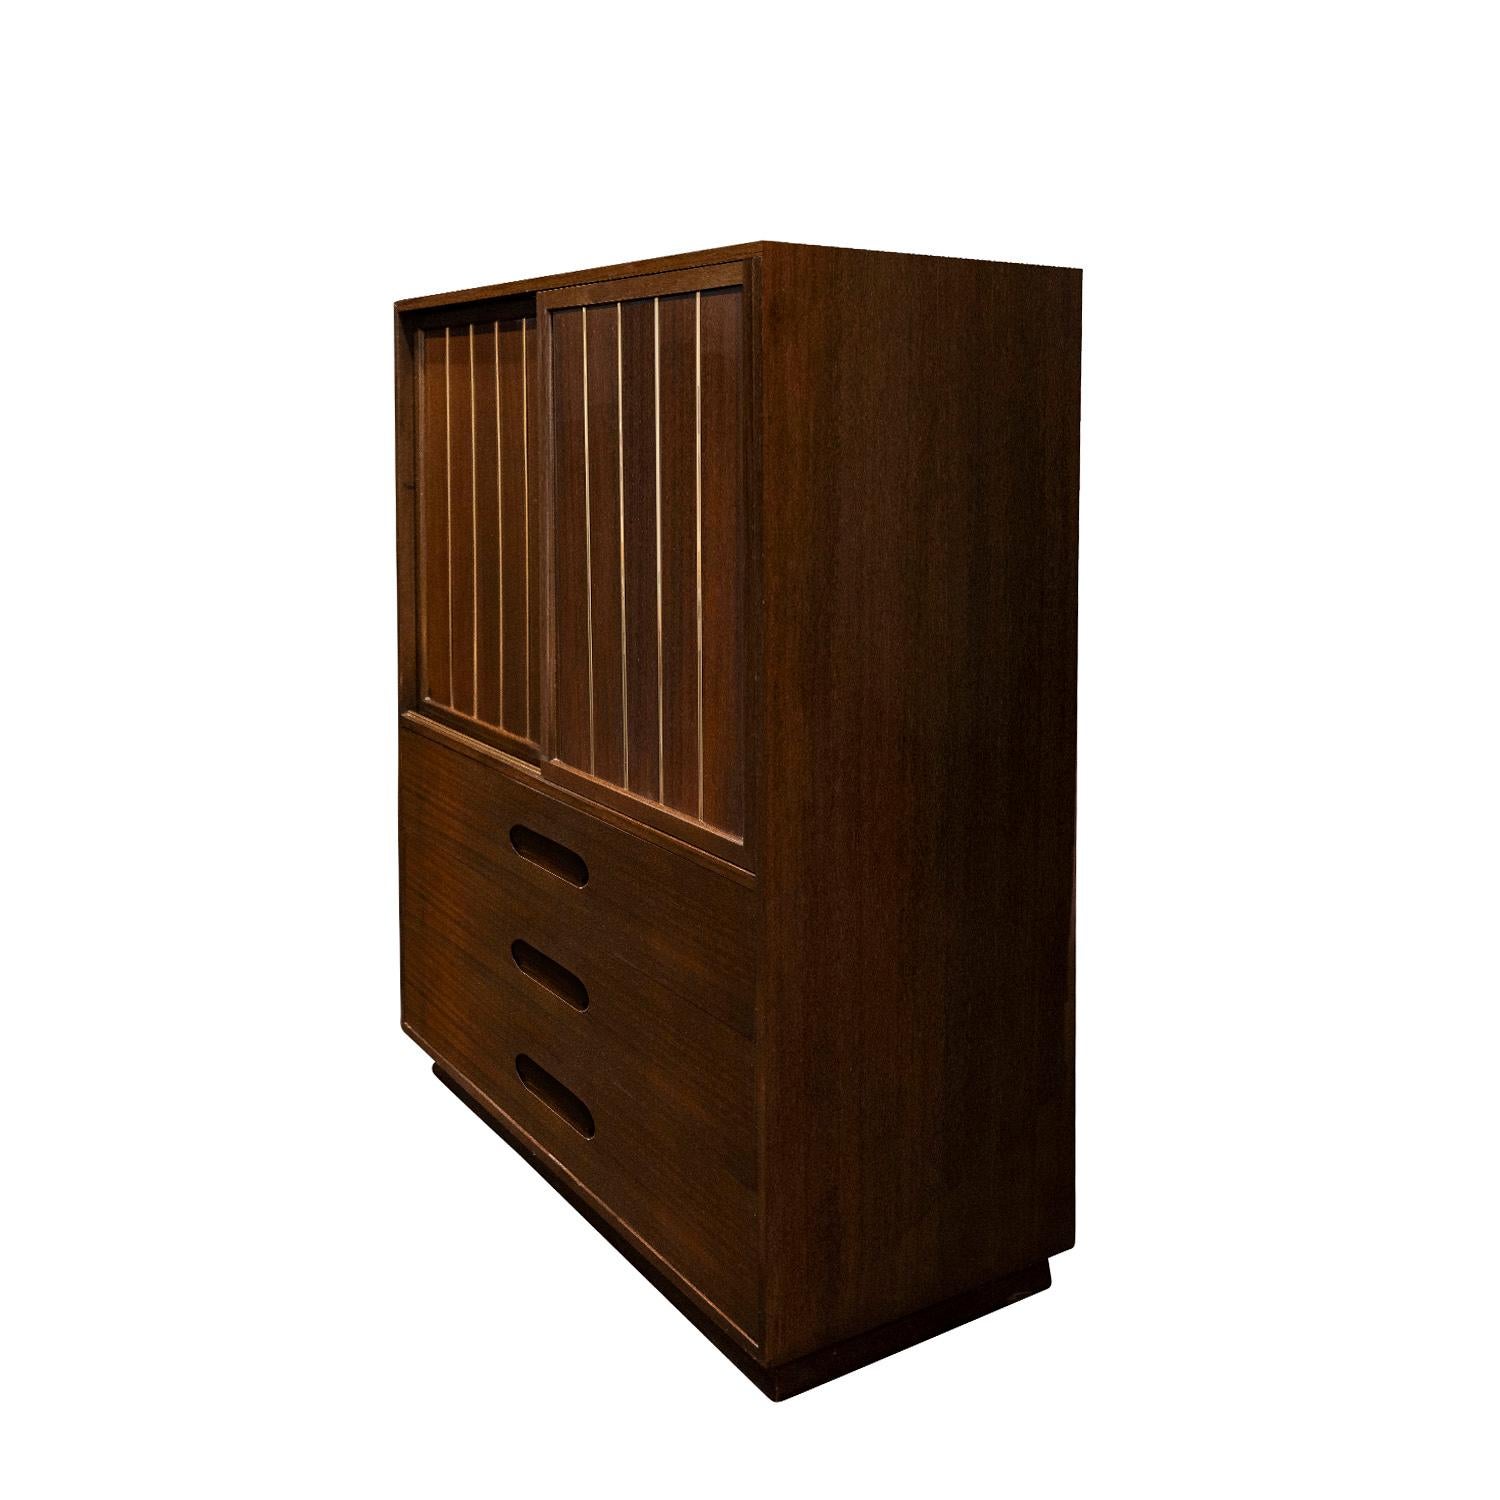 Mid-Century Modern Harvey Probber Chest of Drawers in Mahogany and Brass 1950s 'Signed' For Sale